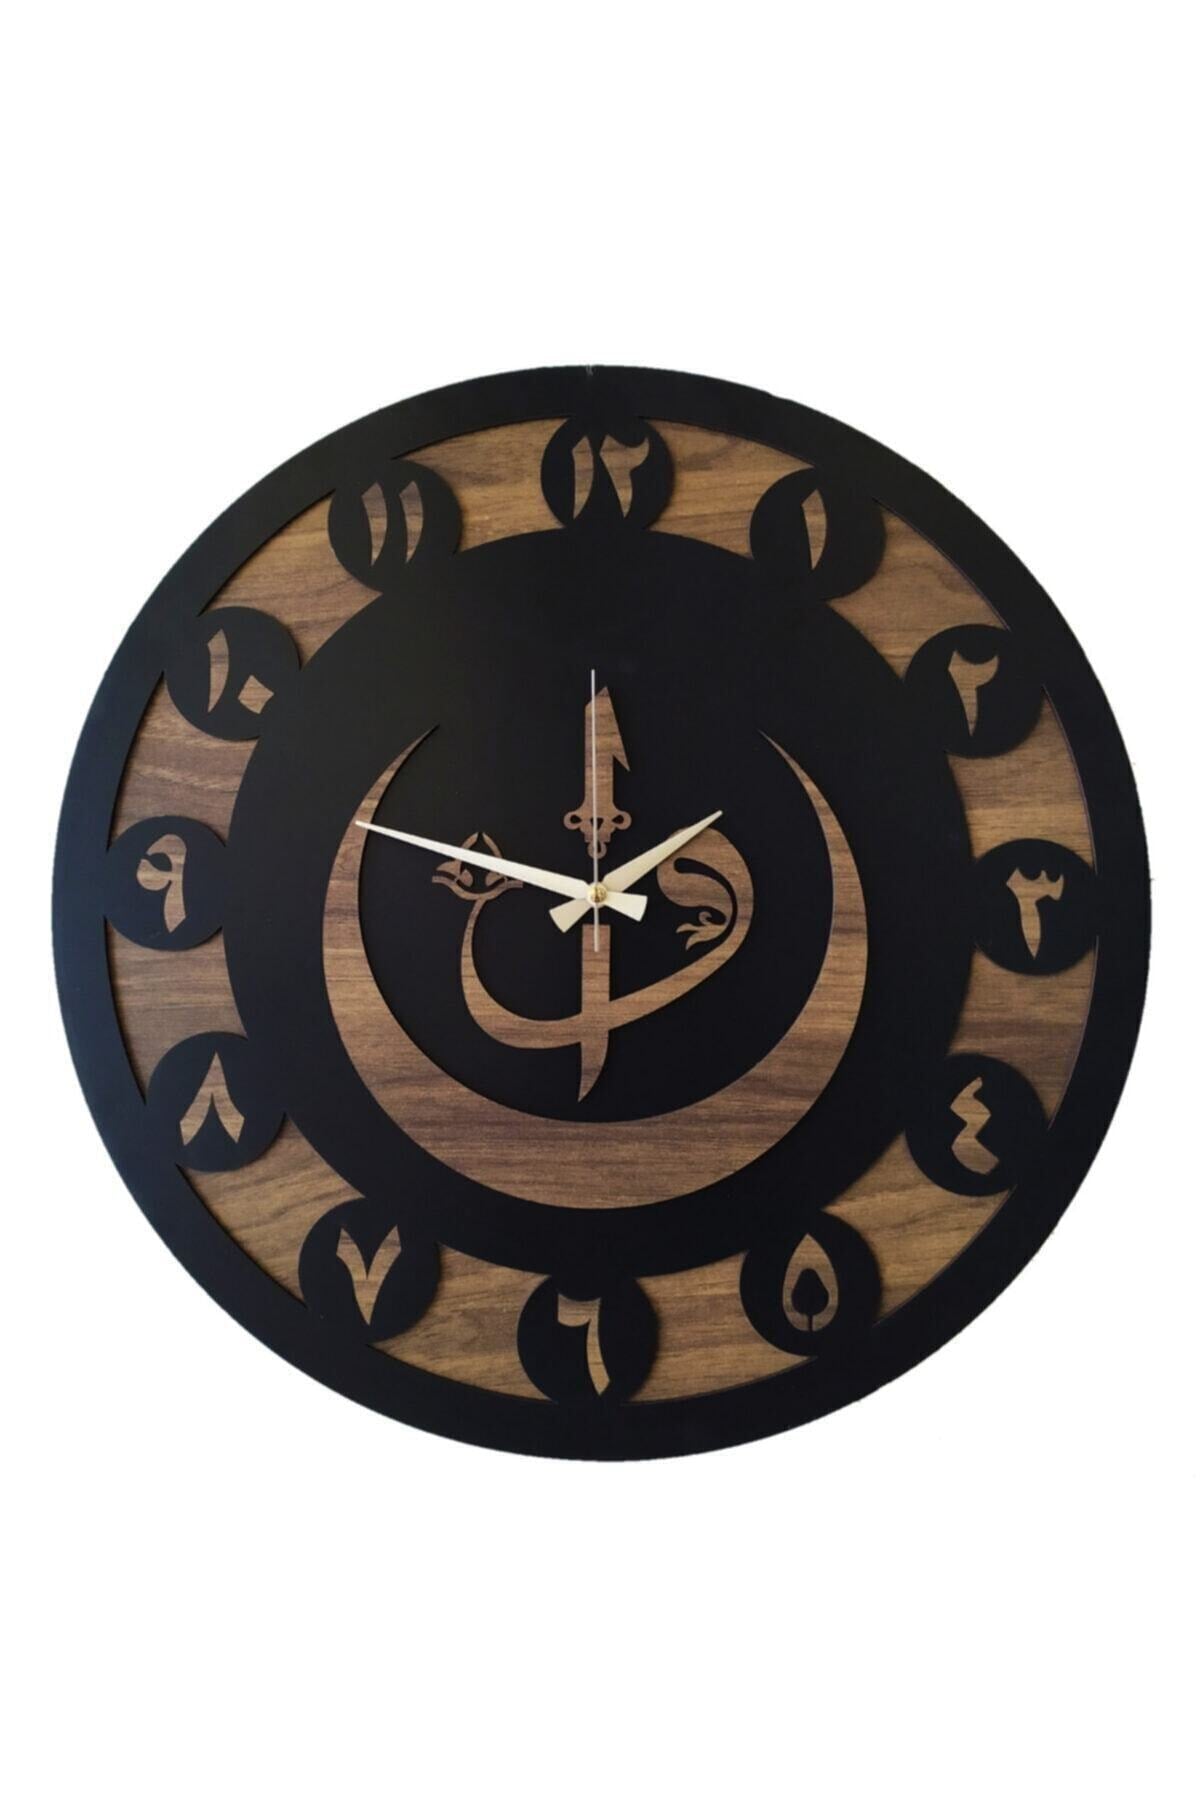 Decor Polo 2 Pieces Arabic Numeral Wooden Wall Clock  Size: Wood and black